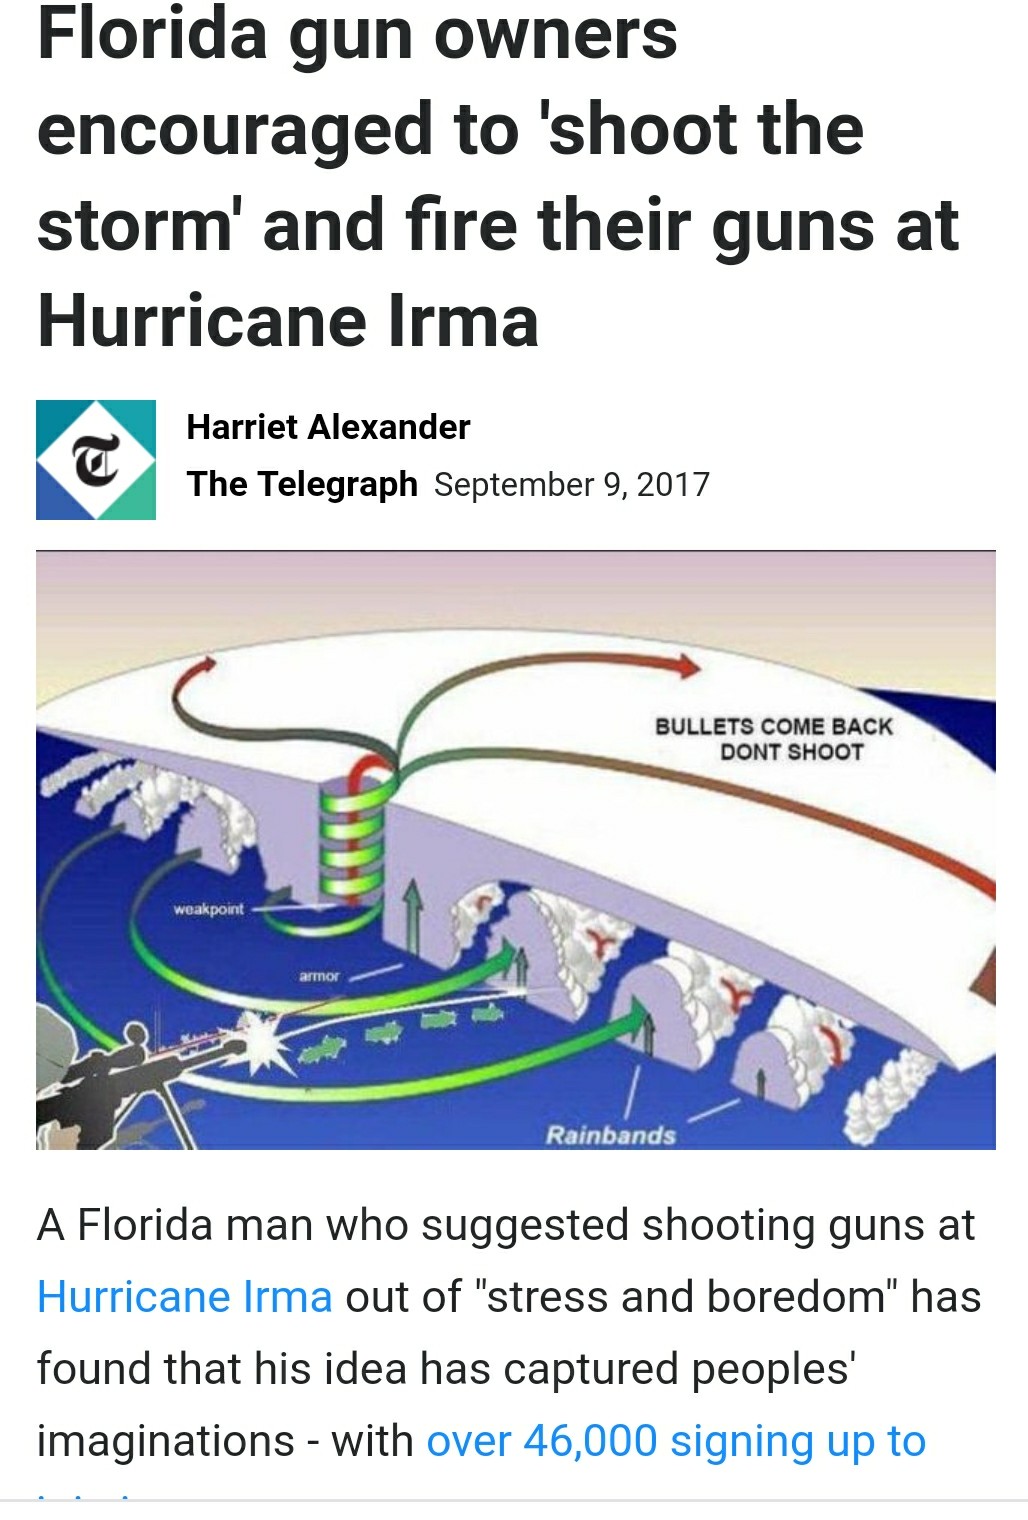 Florida owners encouraged to shoot the storm